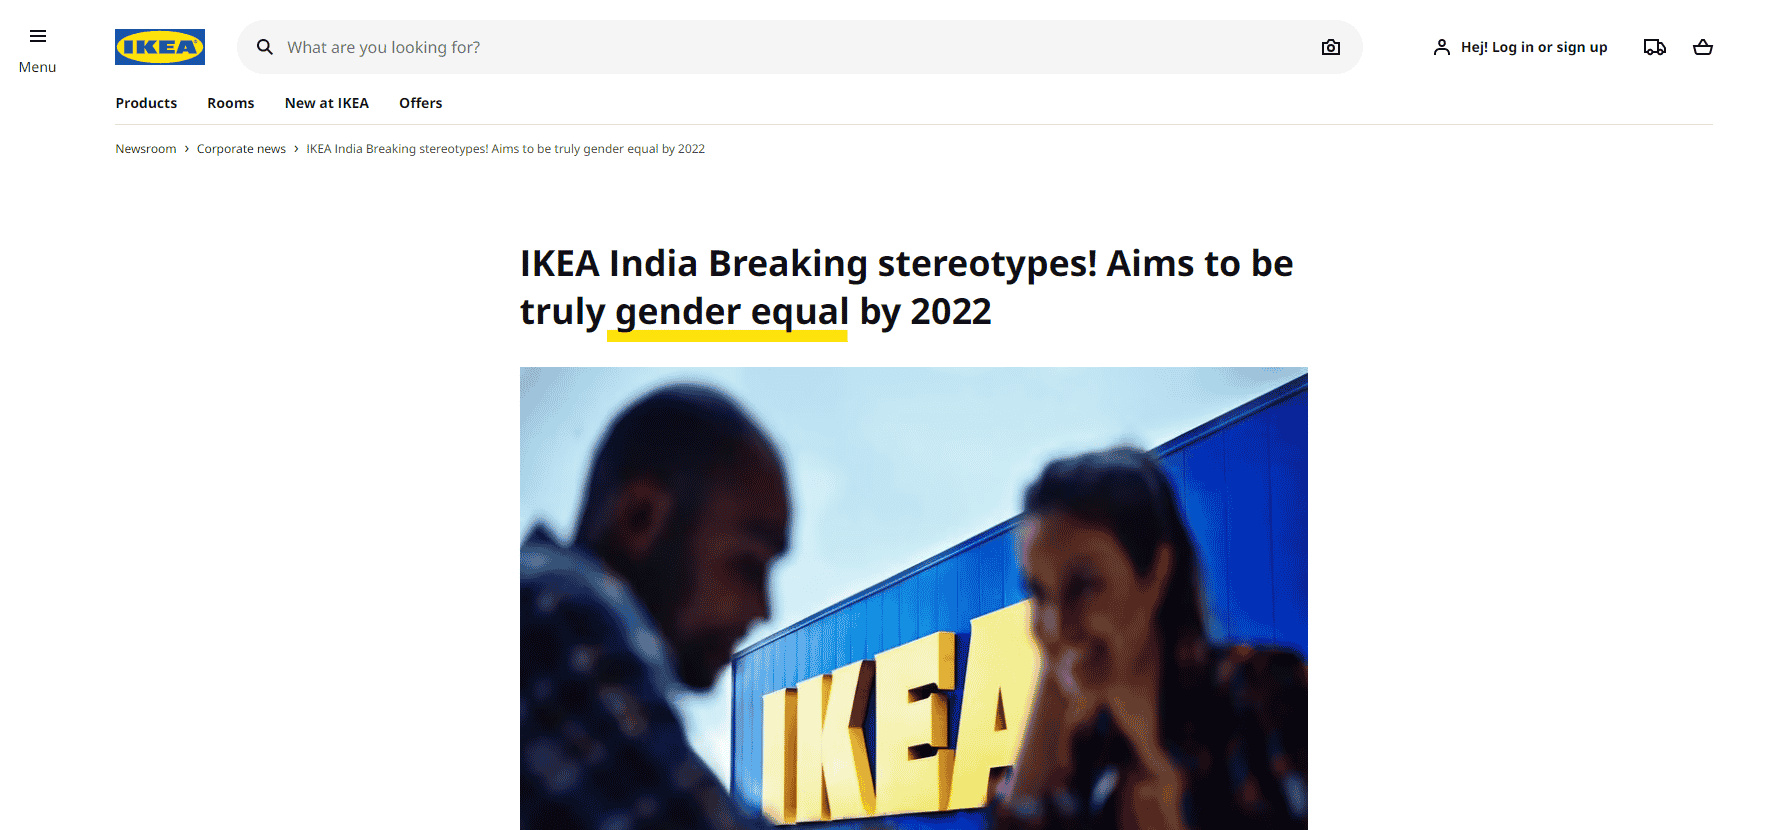 Ikea press release screenshot with gender equal highlighted in yellow